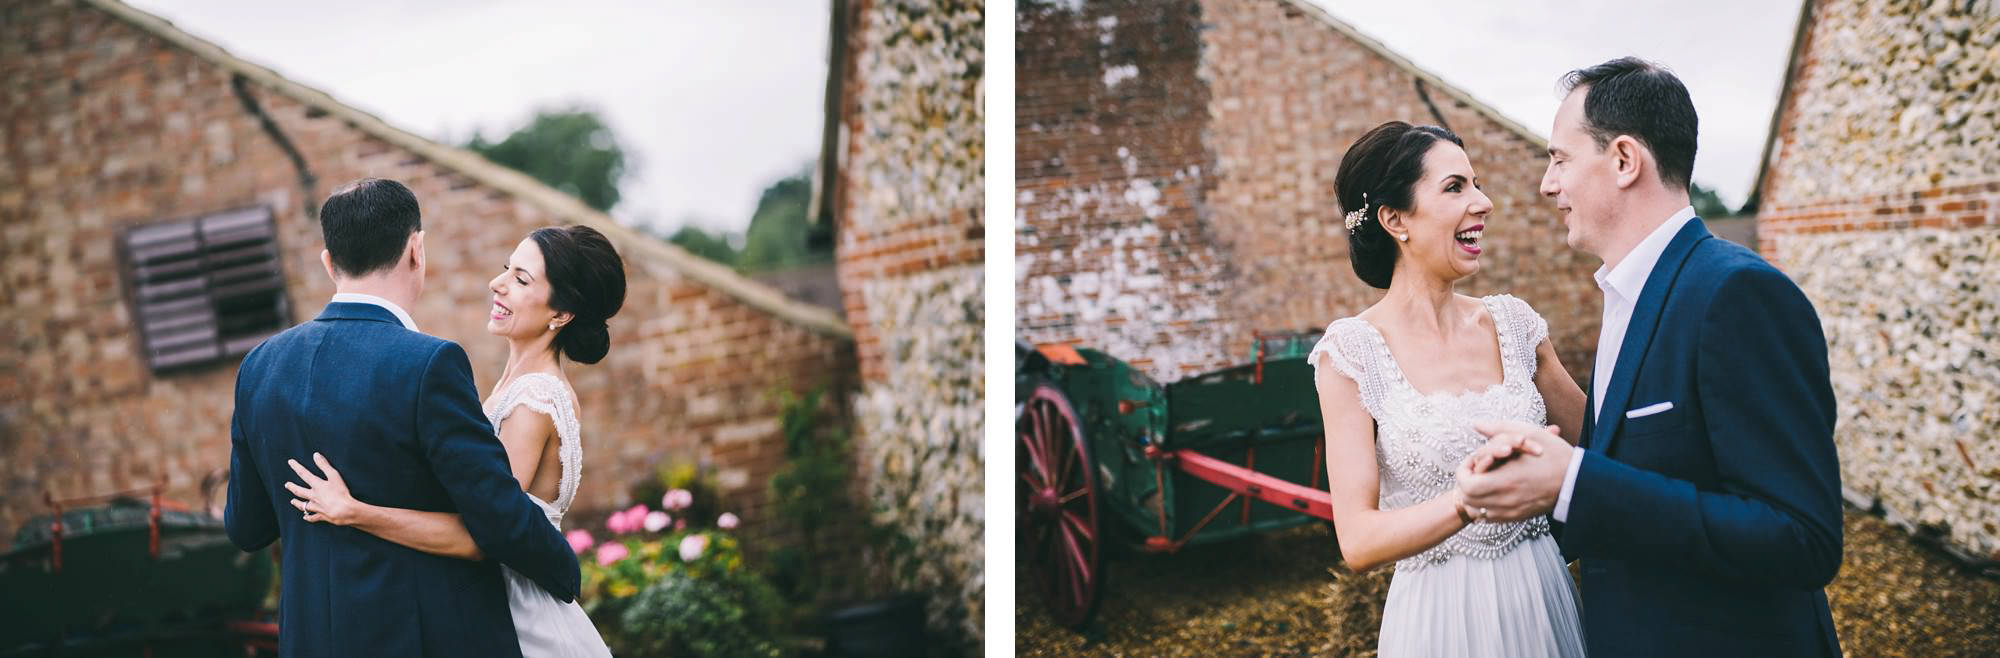 manor-mews-wedding-by-james-powell-photography-026